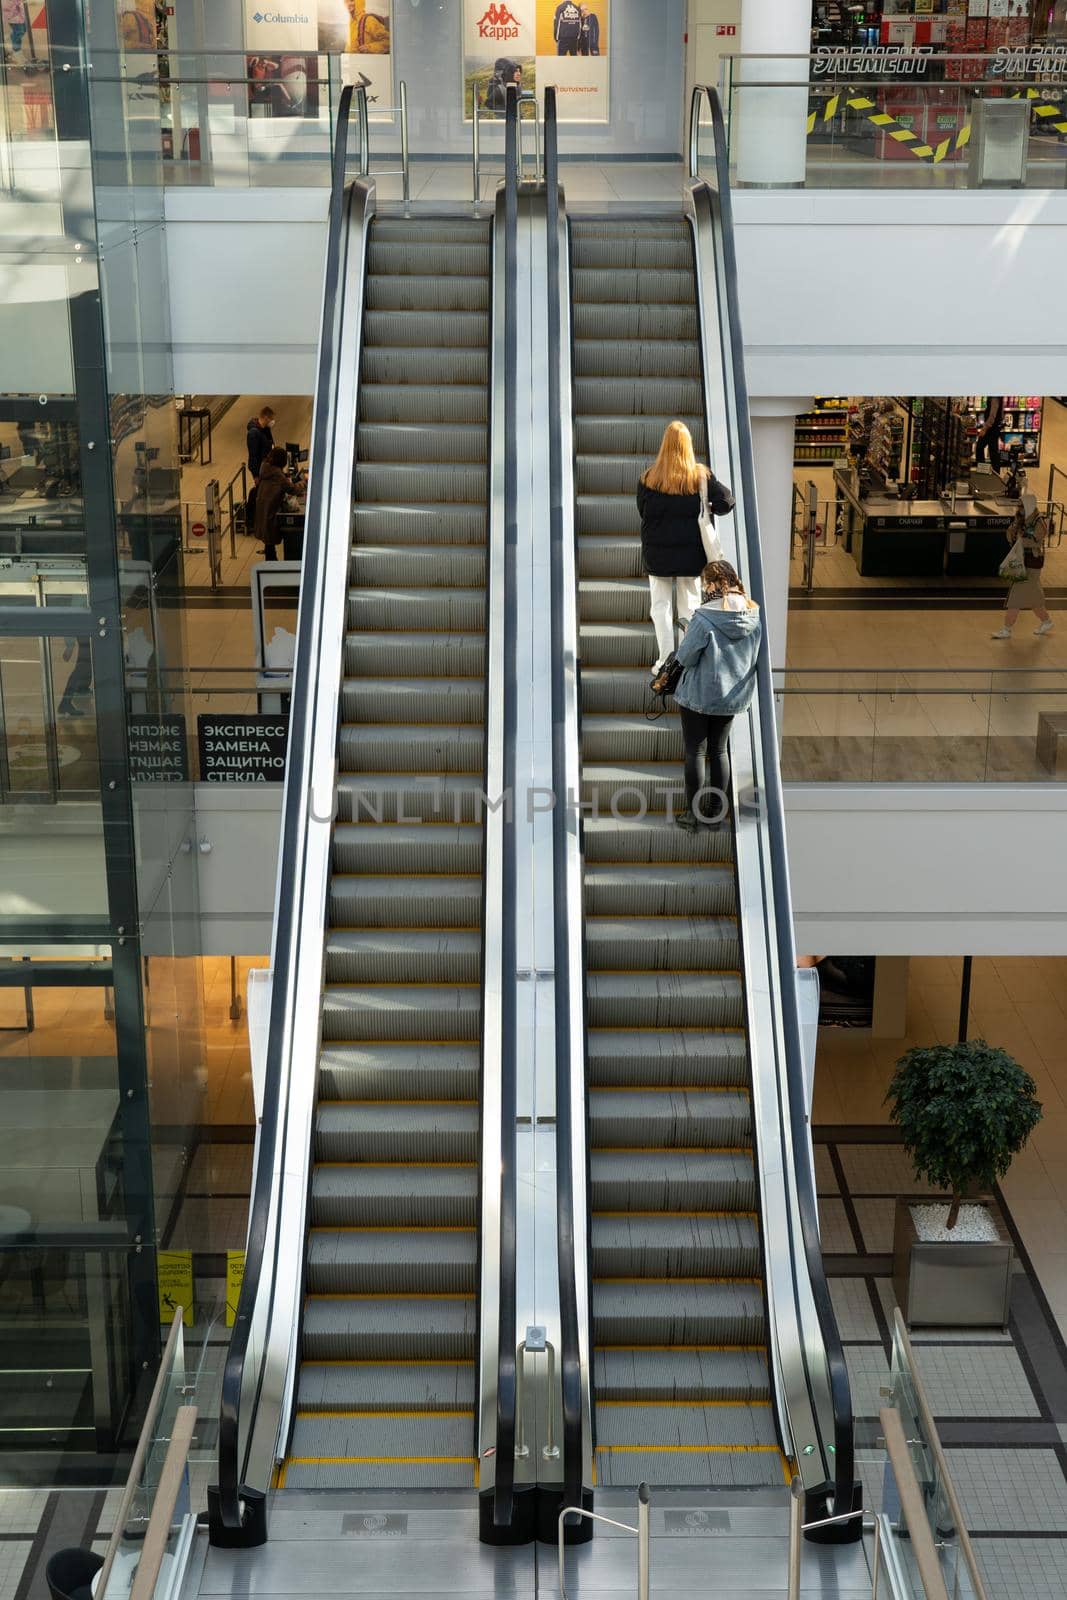 View on escalator in modern shopping mall Triniti by BY-_-BY